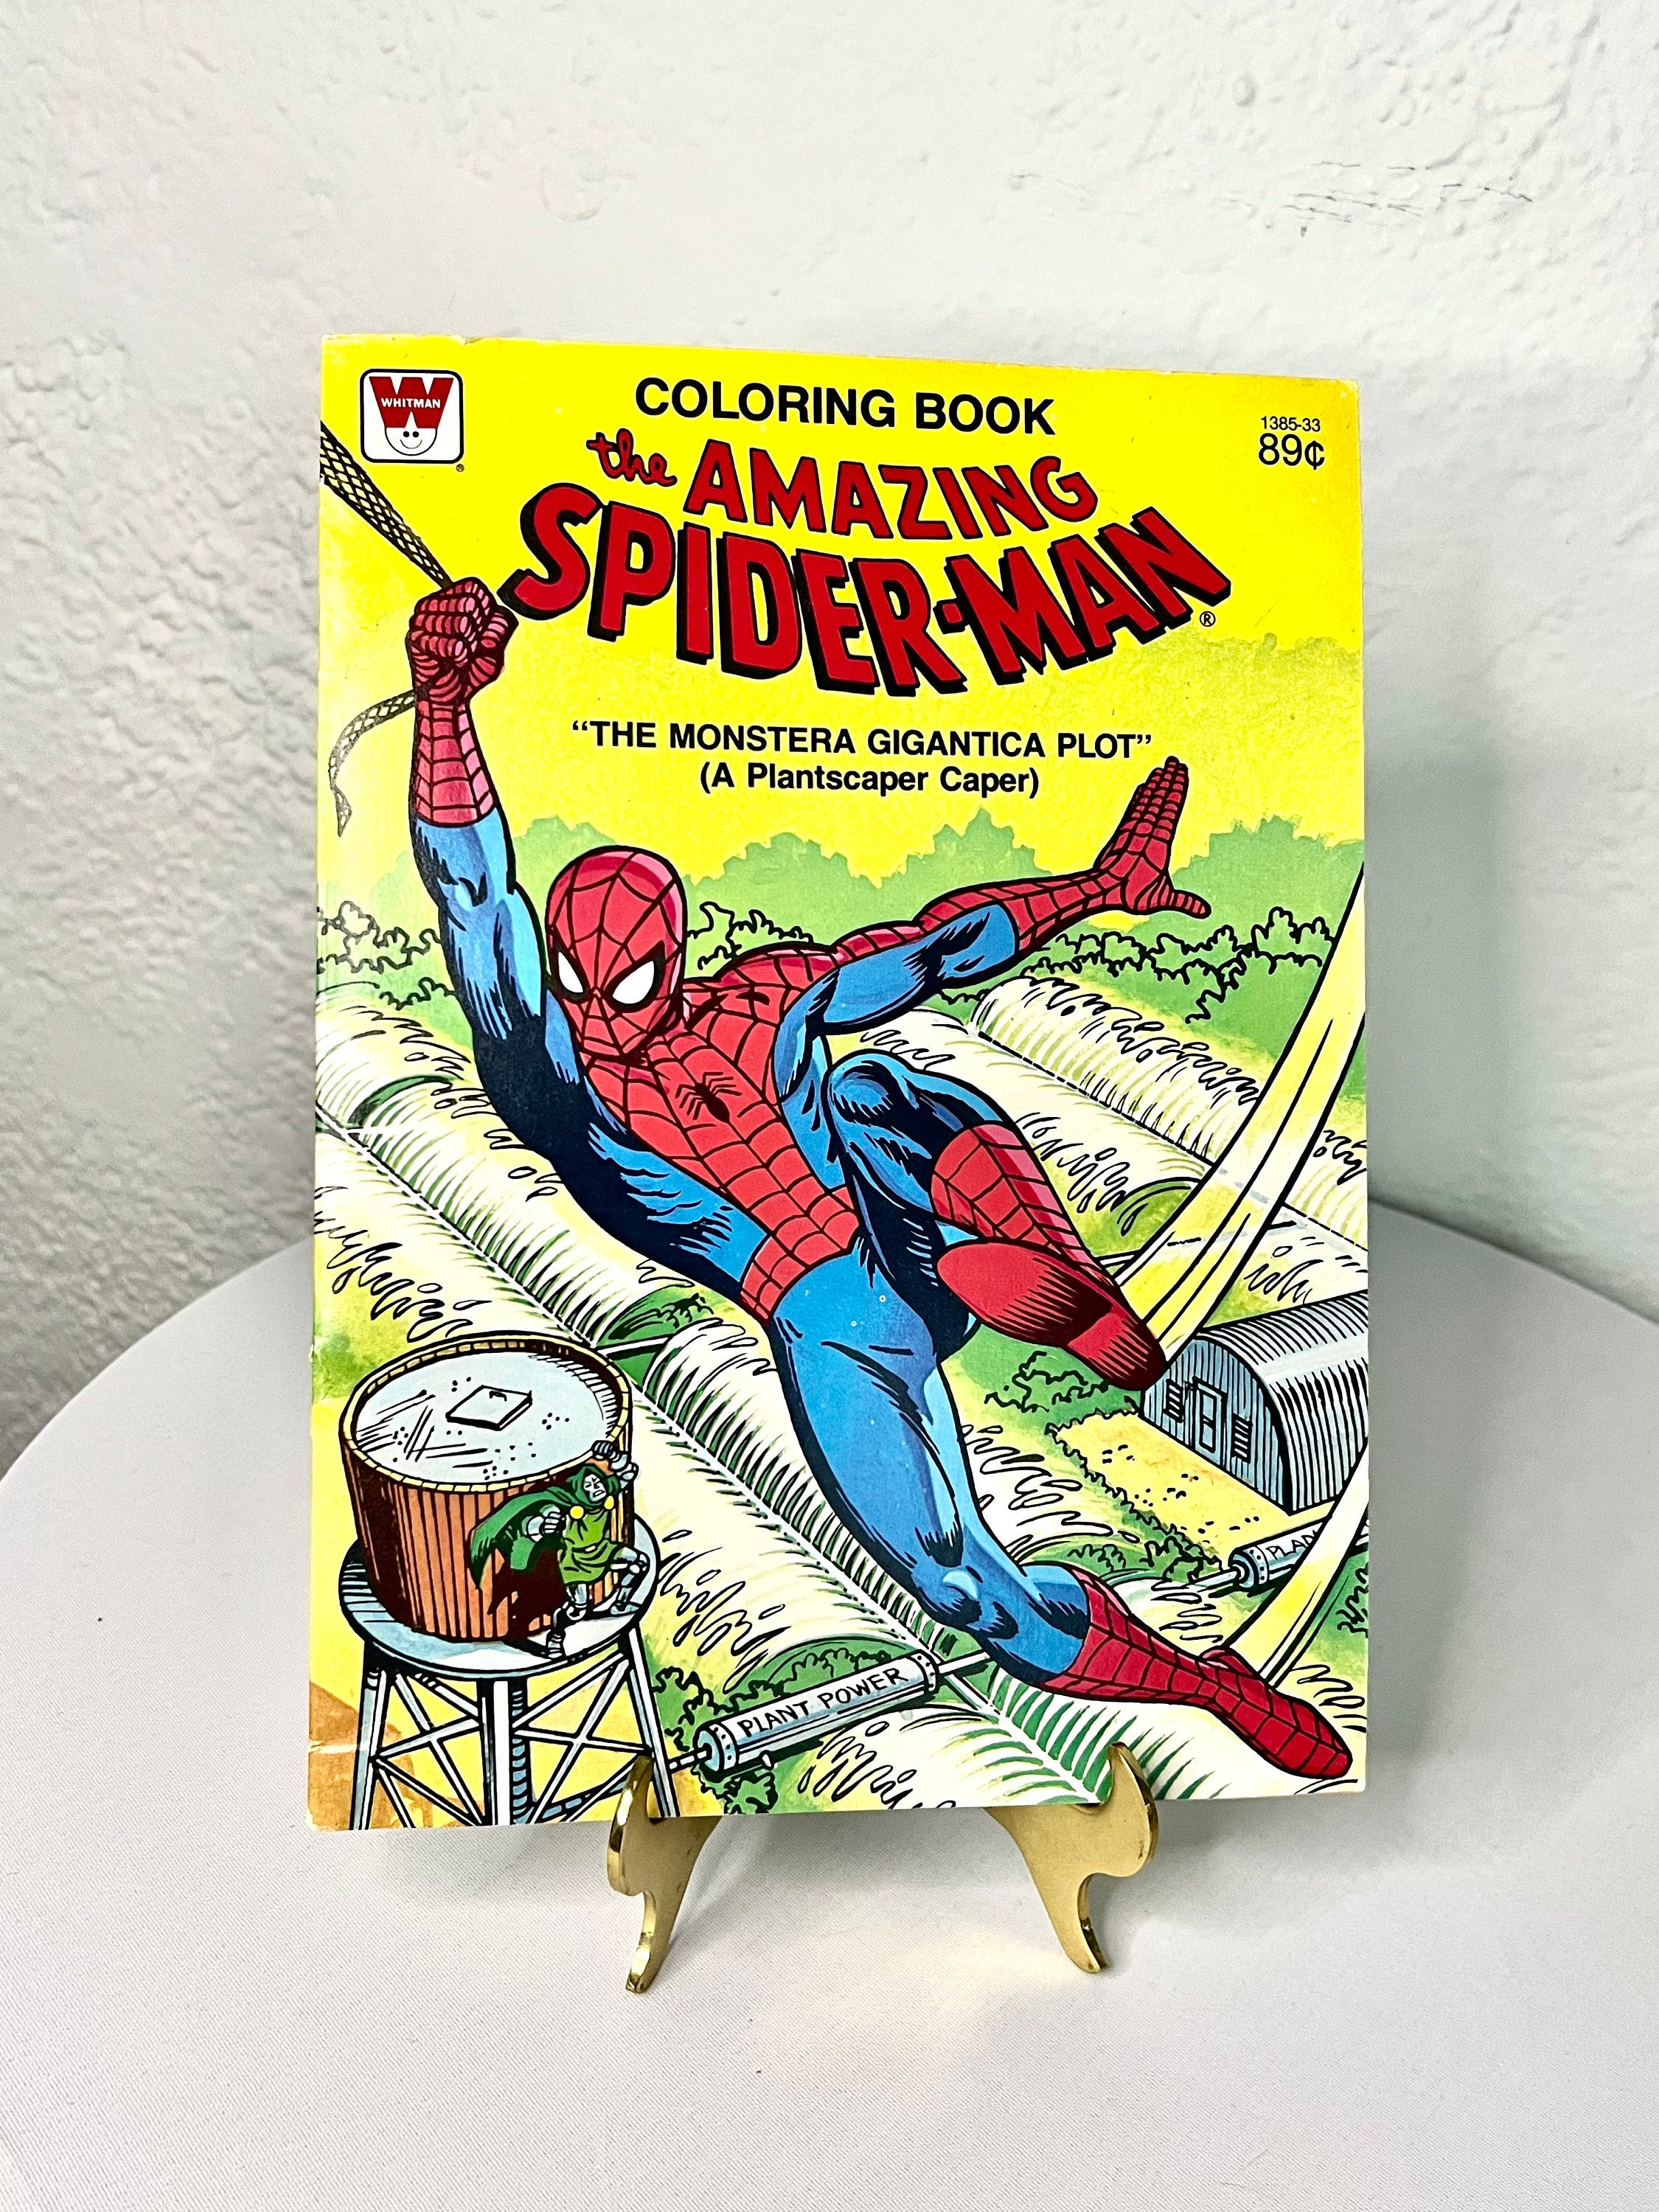 Jumbo Giant Spider Man Coloring Book Vintage 1983 Super Size USA